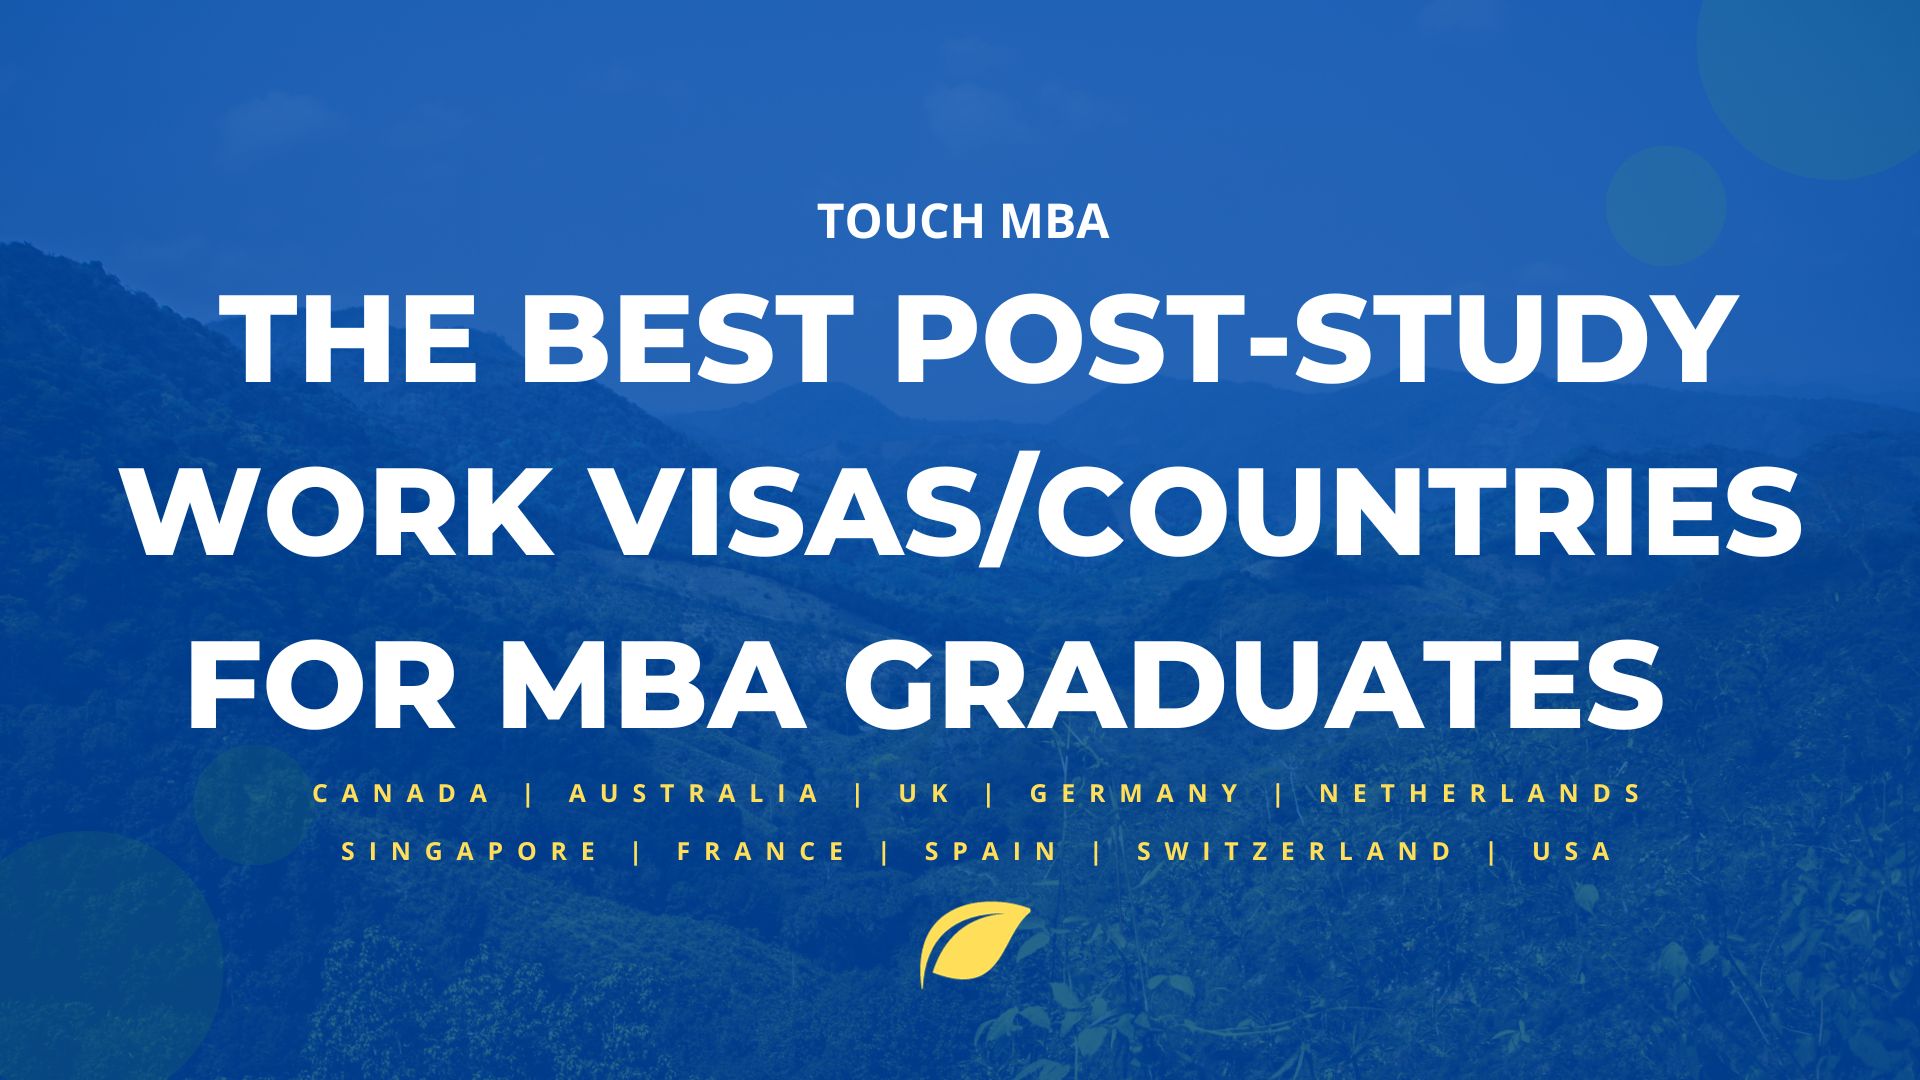 10 Countries with the Best Post-Study Work Visas for MBA Graduates